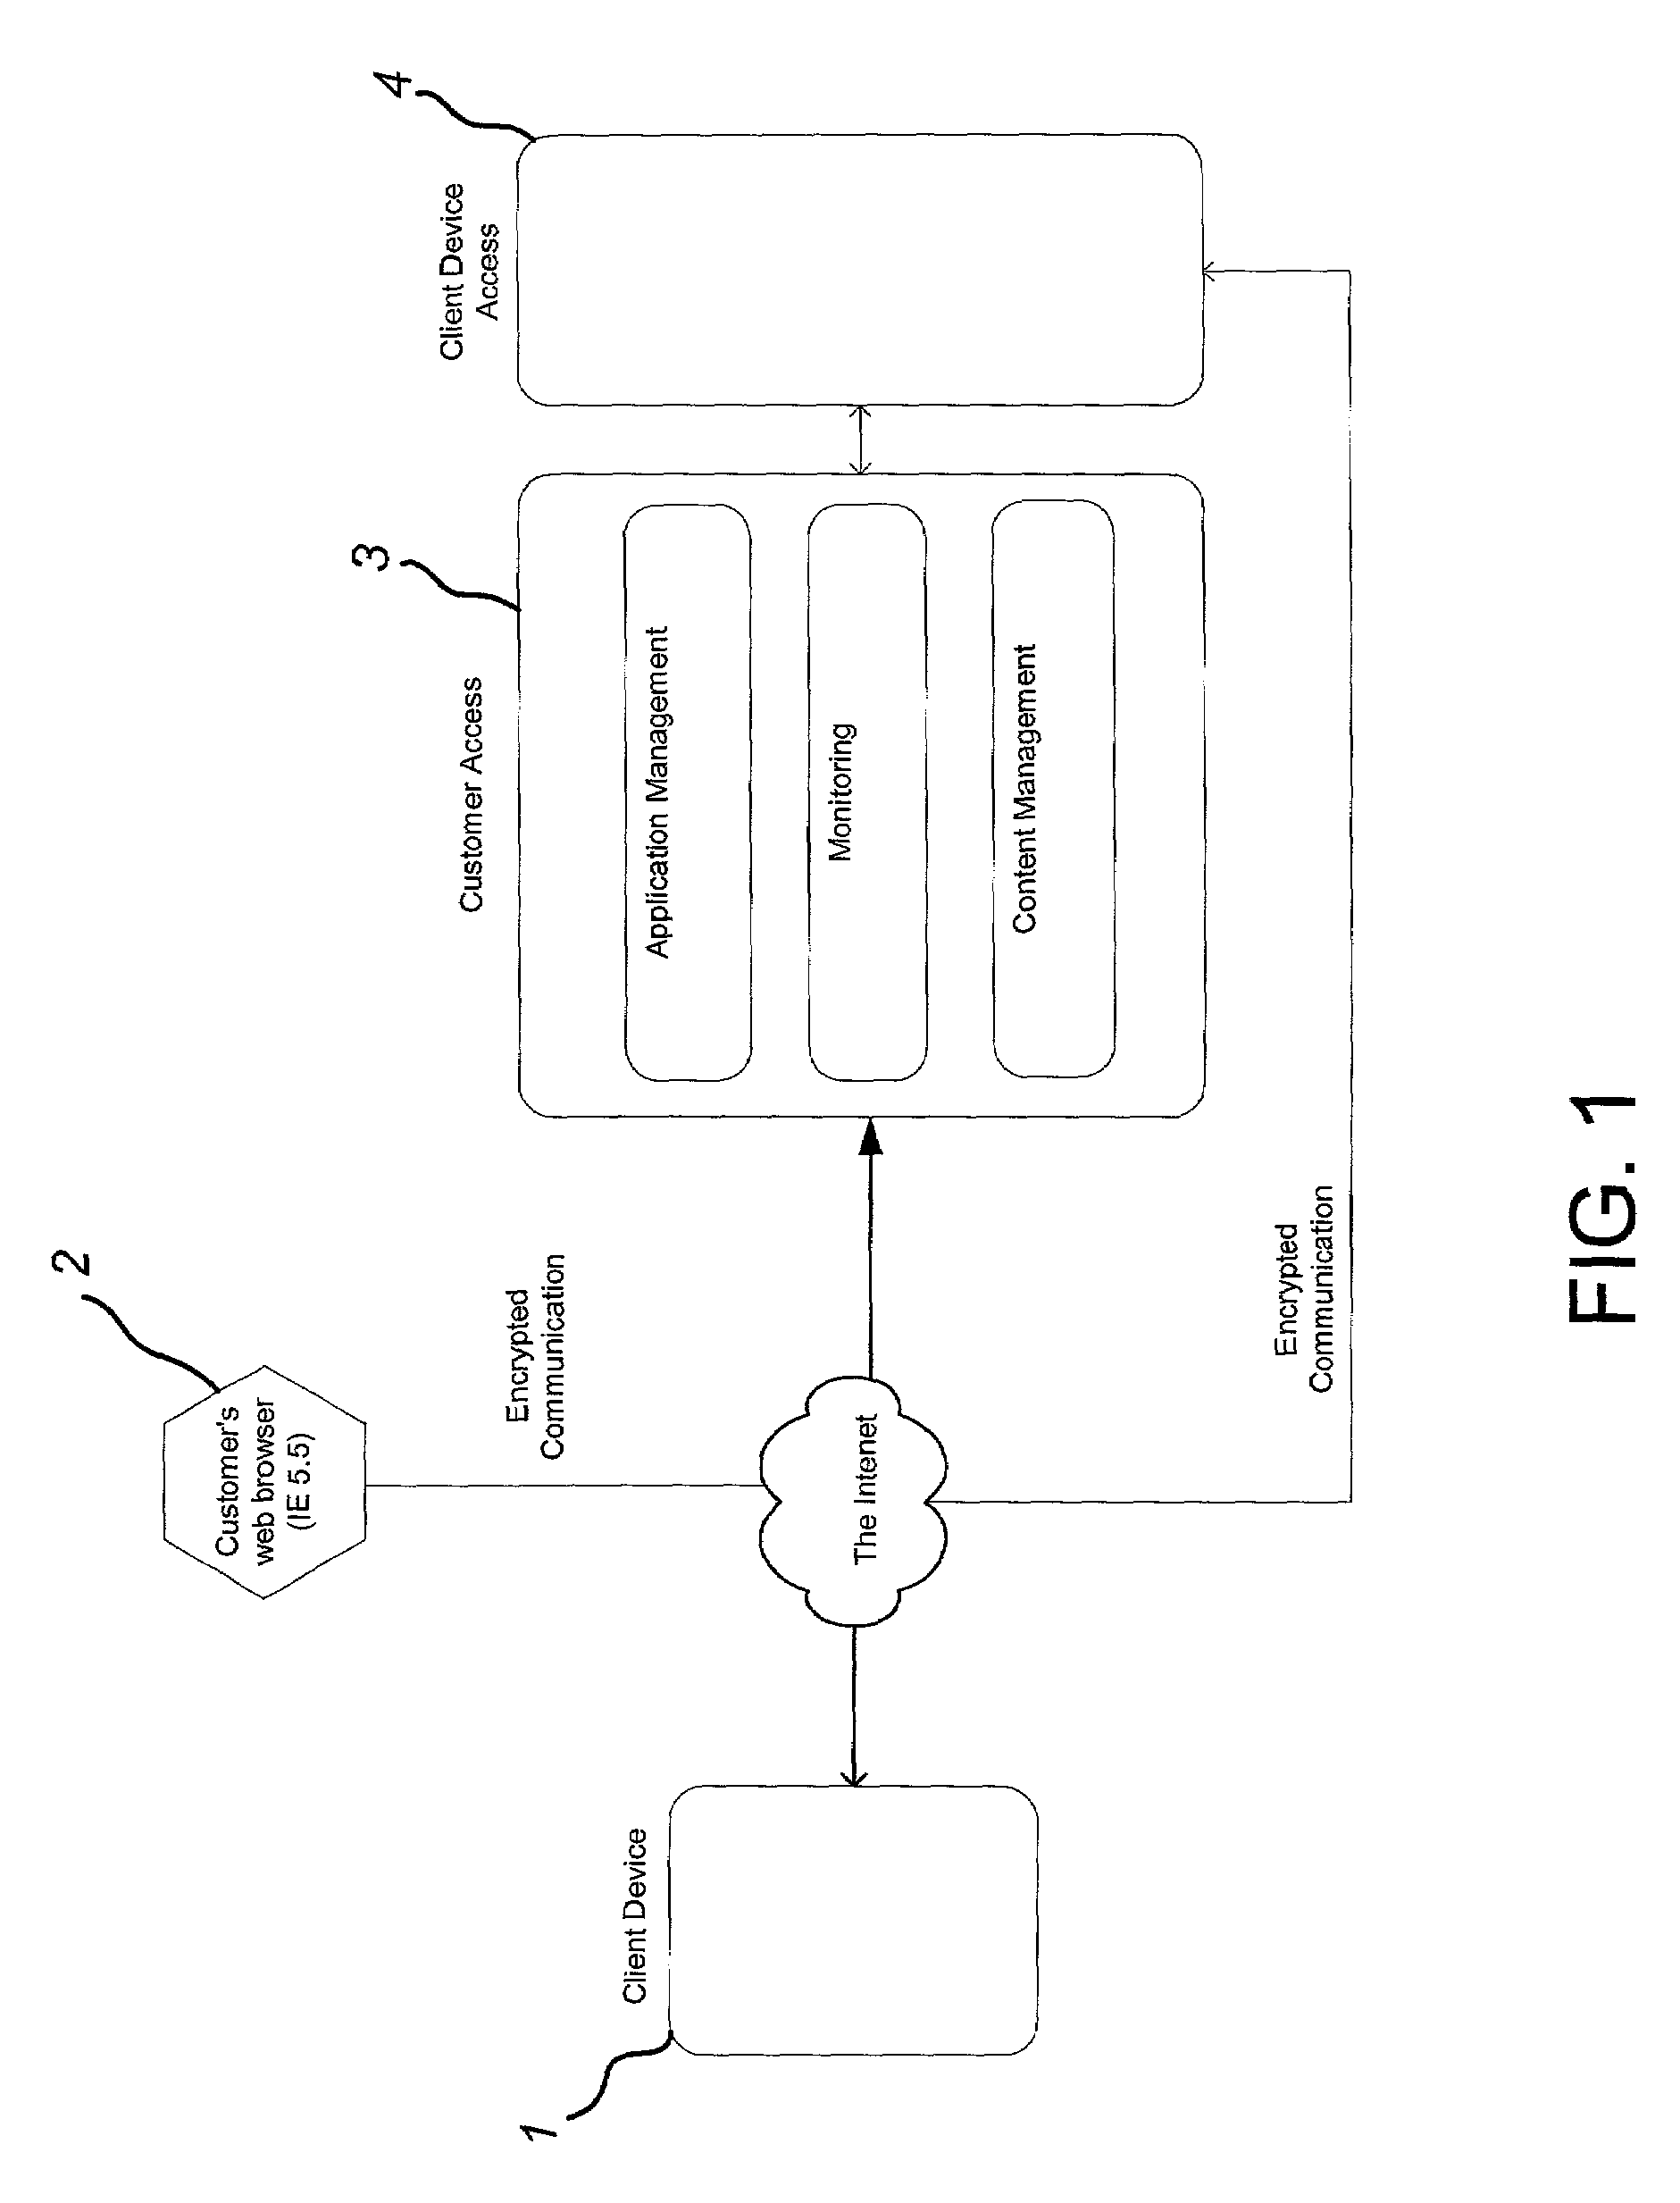 System and method for providing fault-tolerant remote controlled computing devices